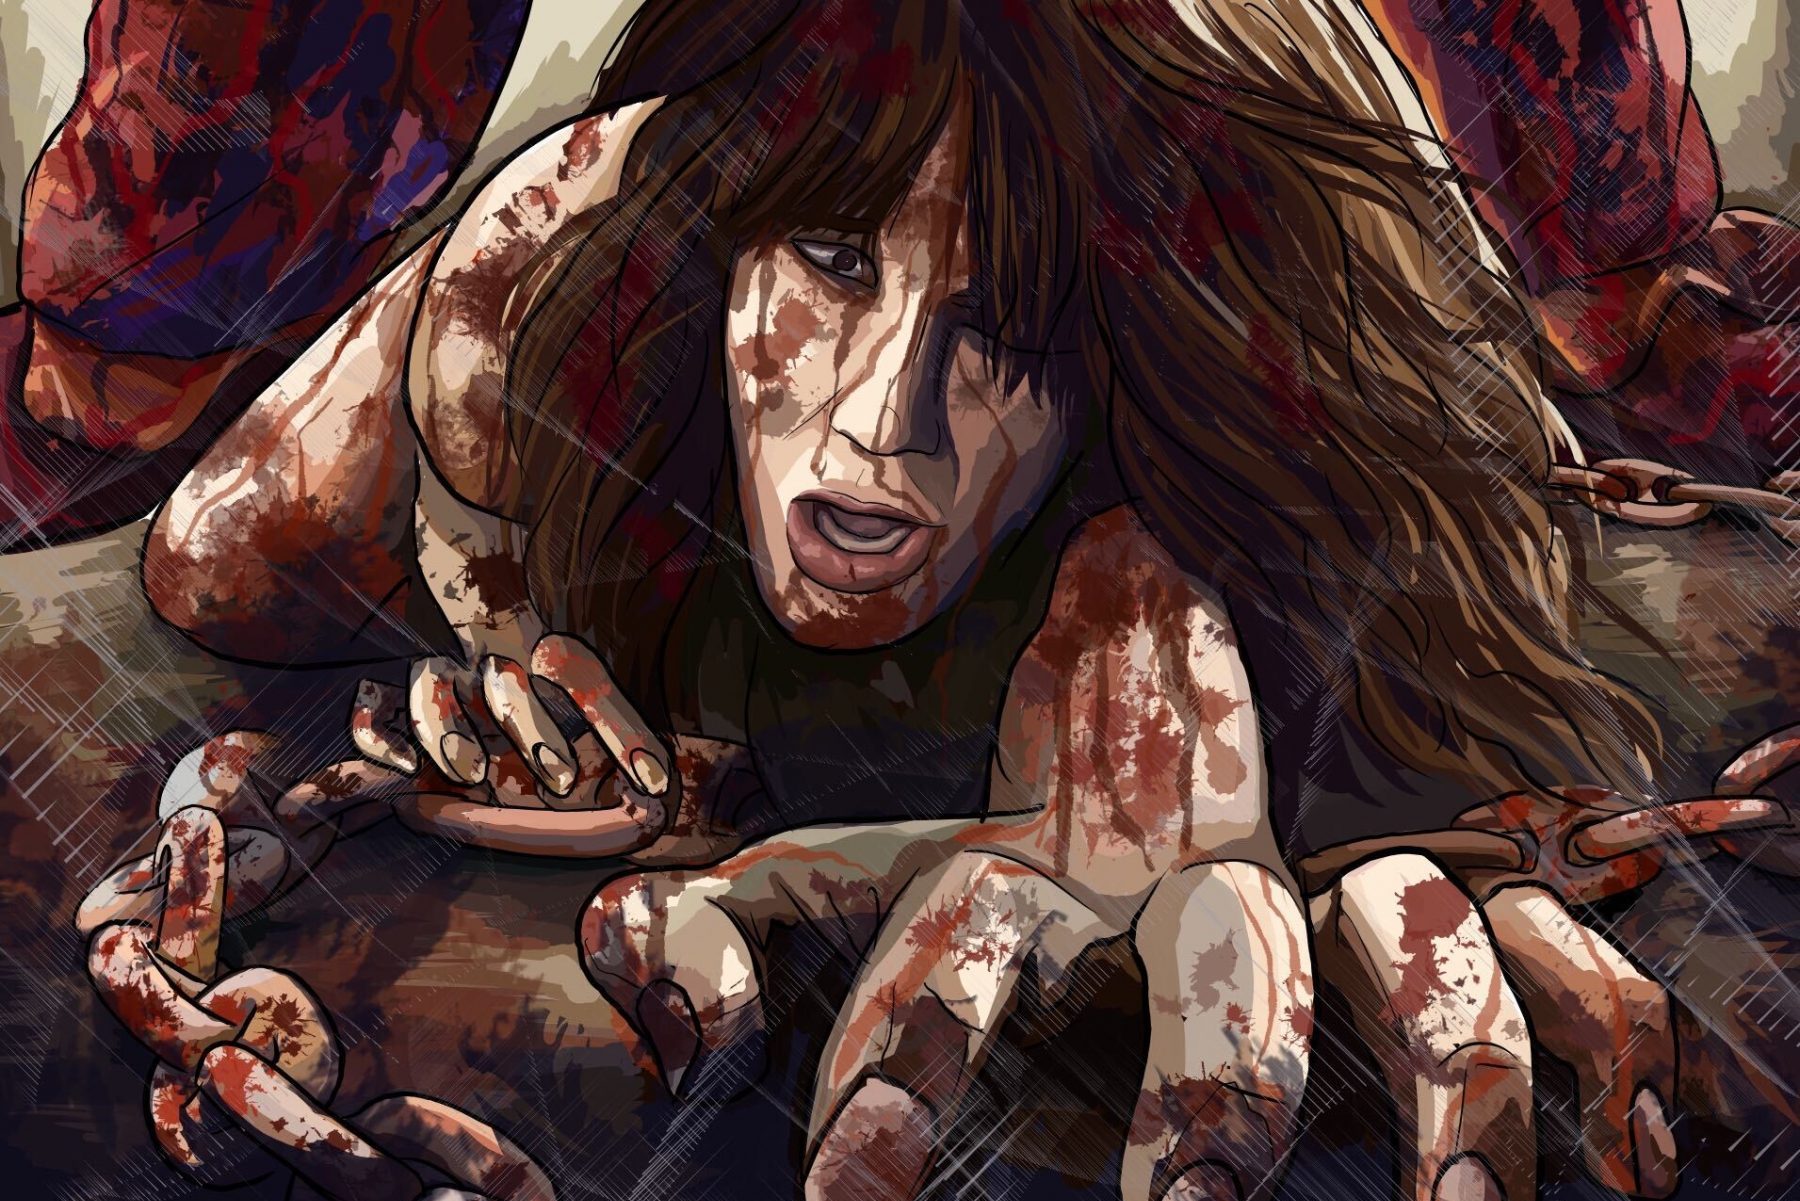 In an article about feminist horror films, an illustration of a bloody woman crawling on the ground